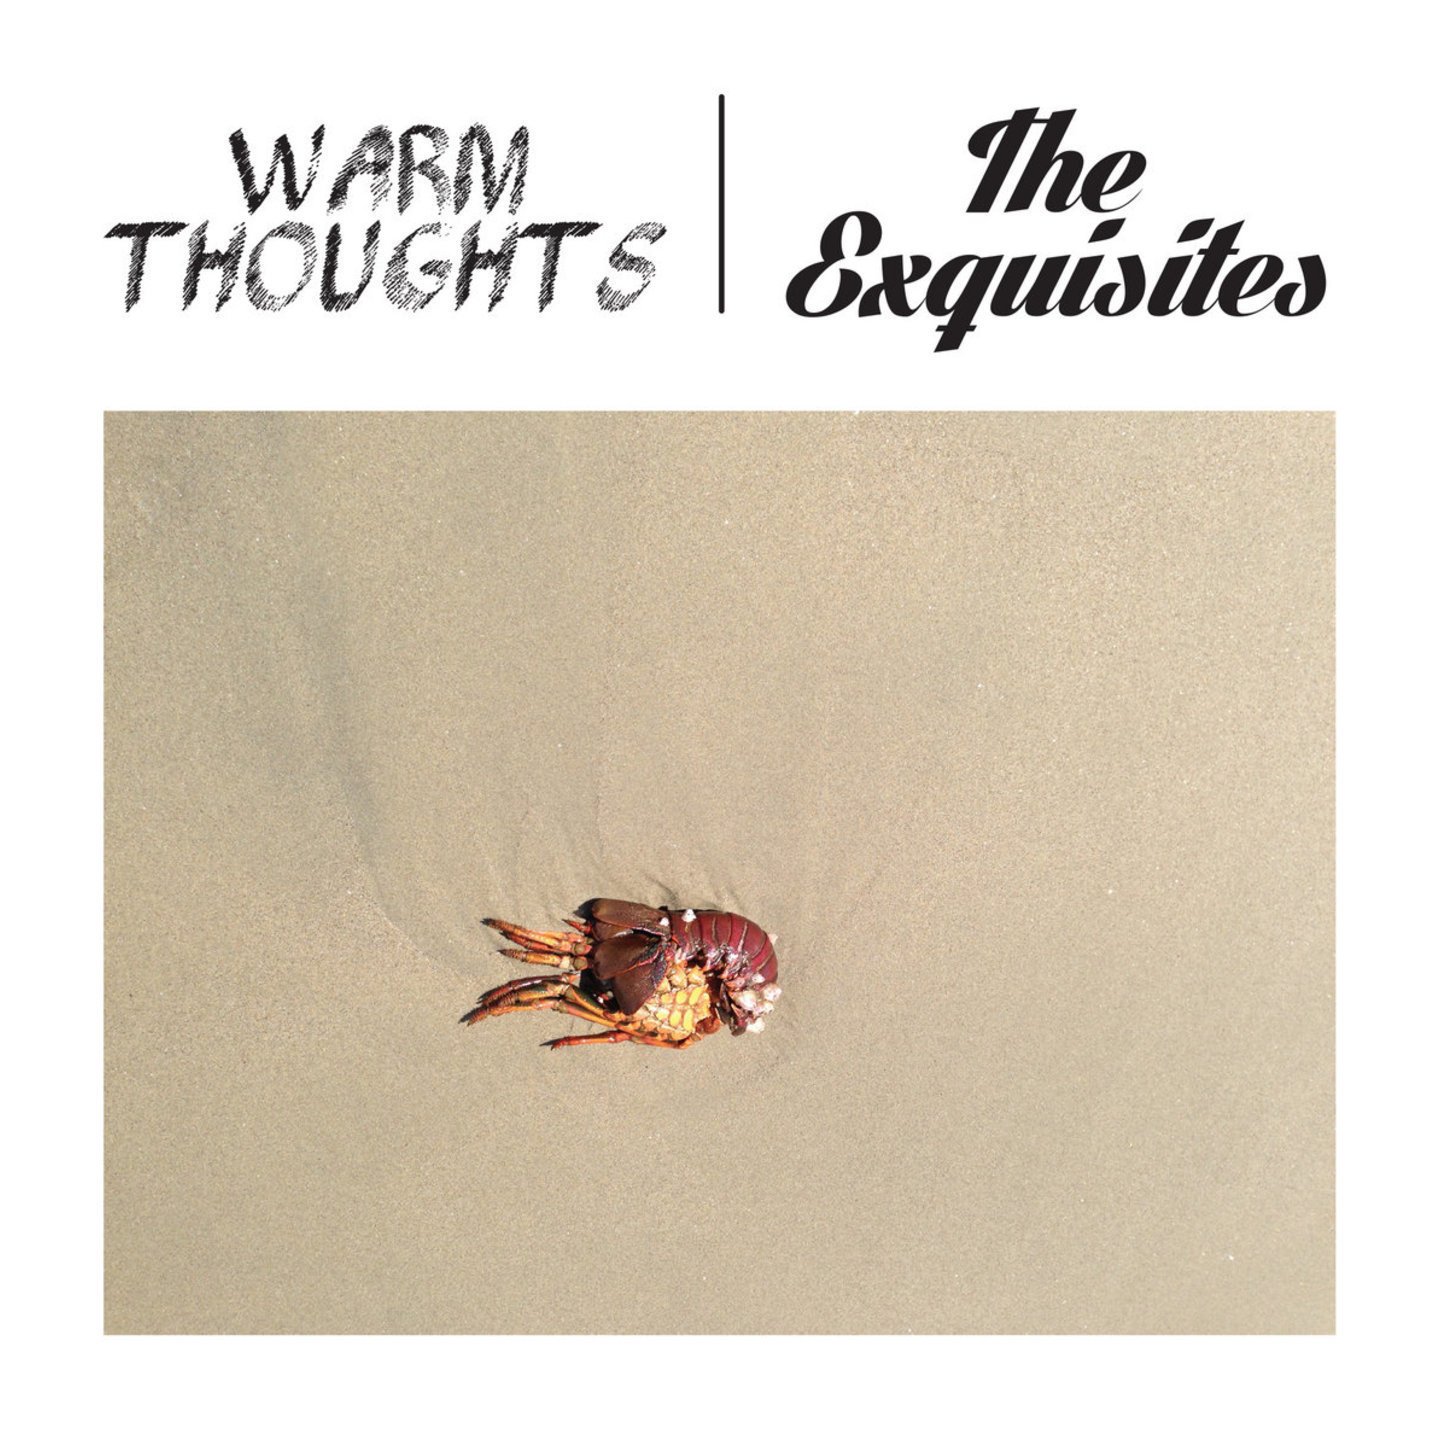 WARM THOUGHTS  EXQUISITES, THE - Split 7